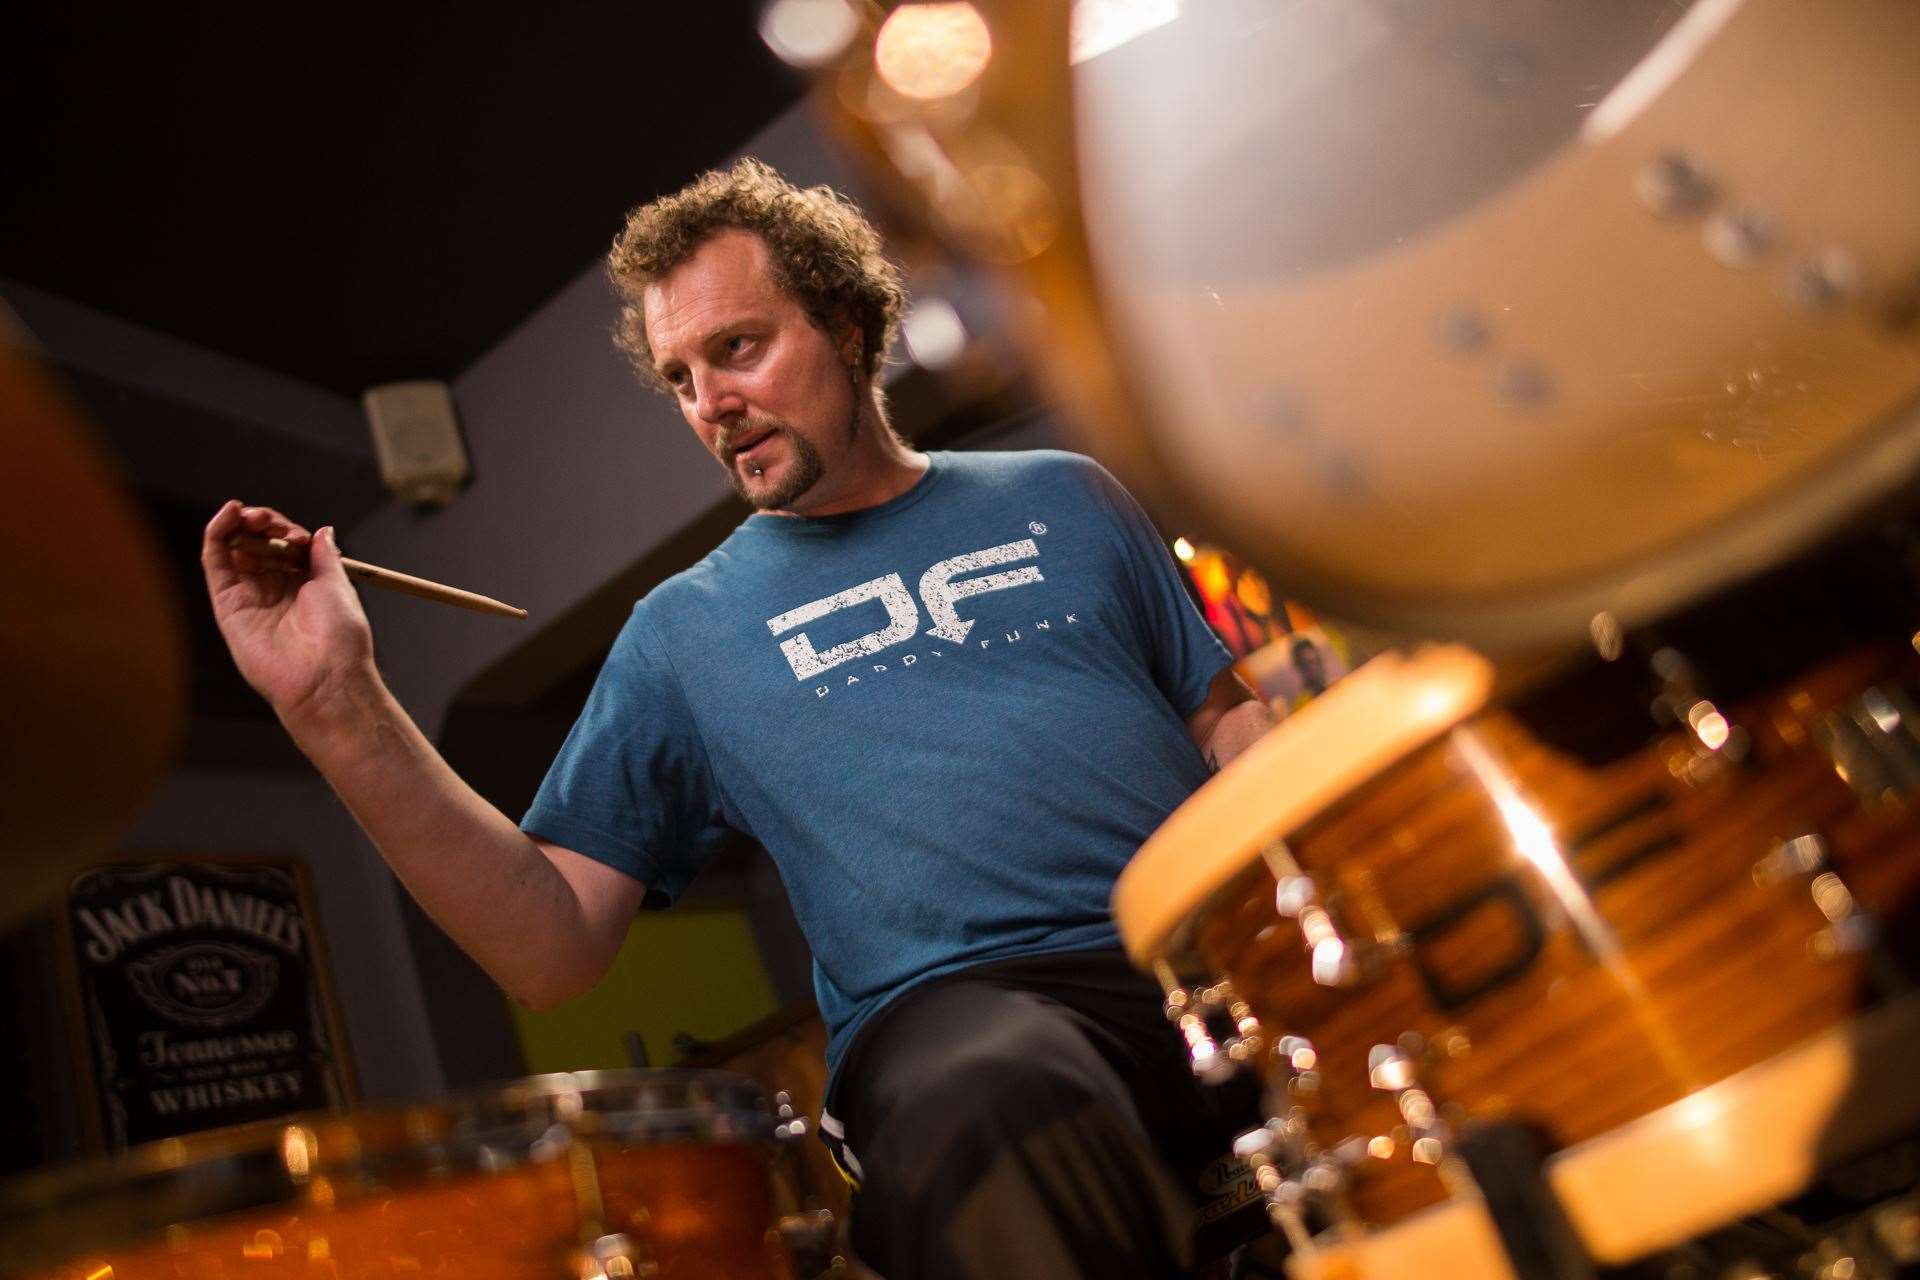 Simon Greenhill of Daddy Funk Drums - who is based at Burgie.